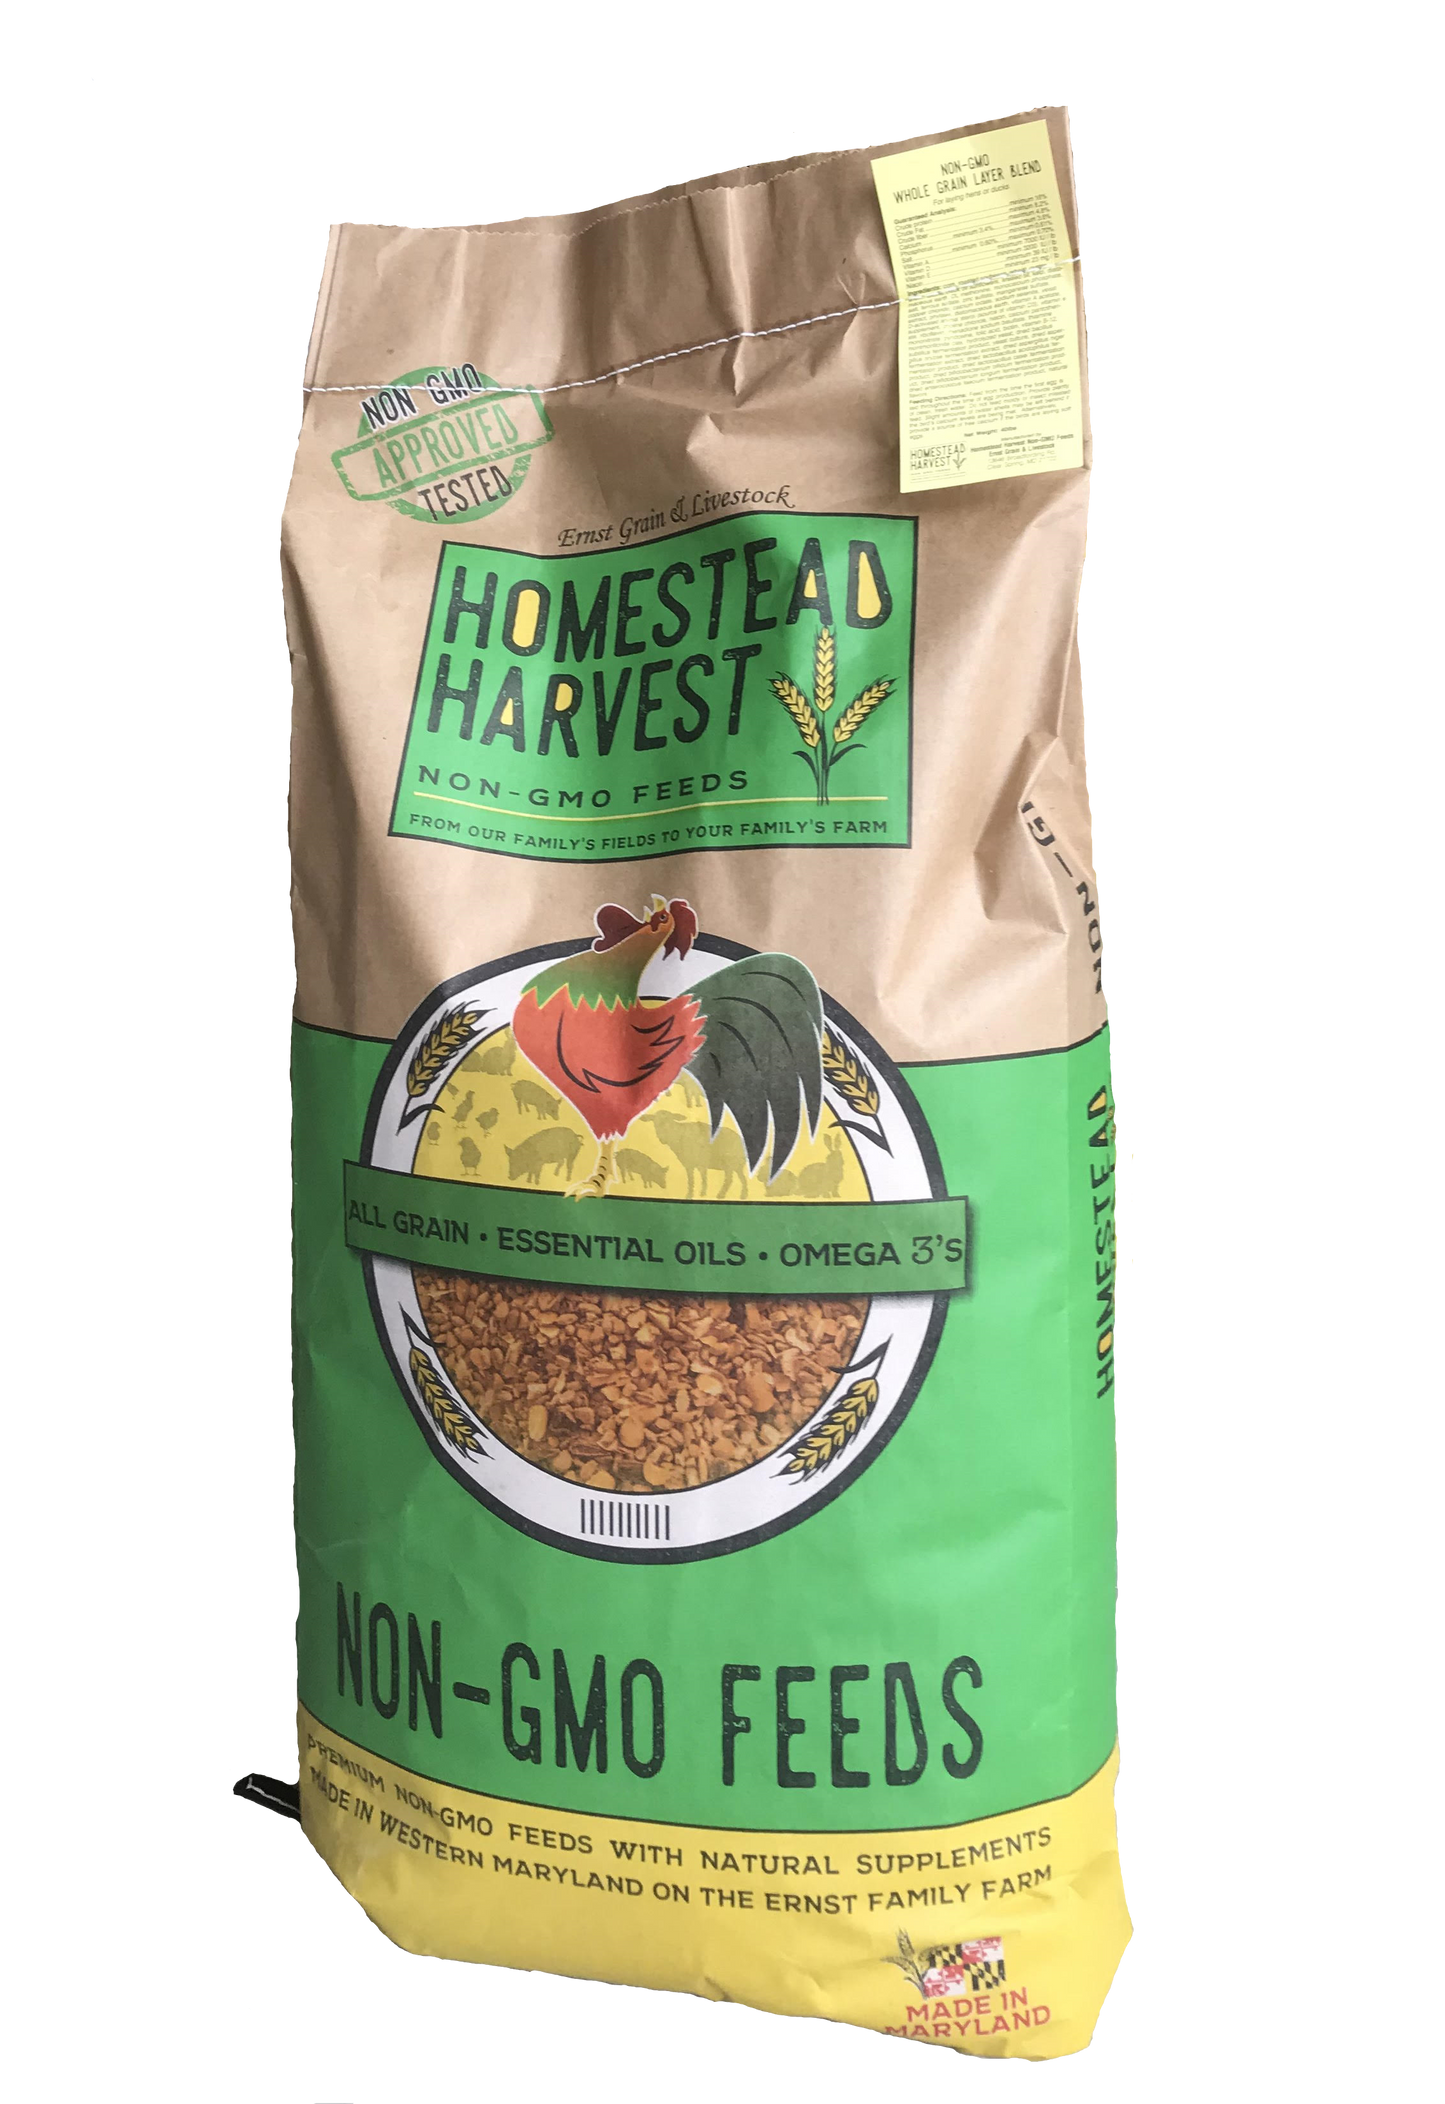 Homestead Harvest Non-GMO Soy Free Chick Starter 22% For growing chicks